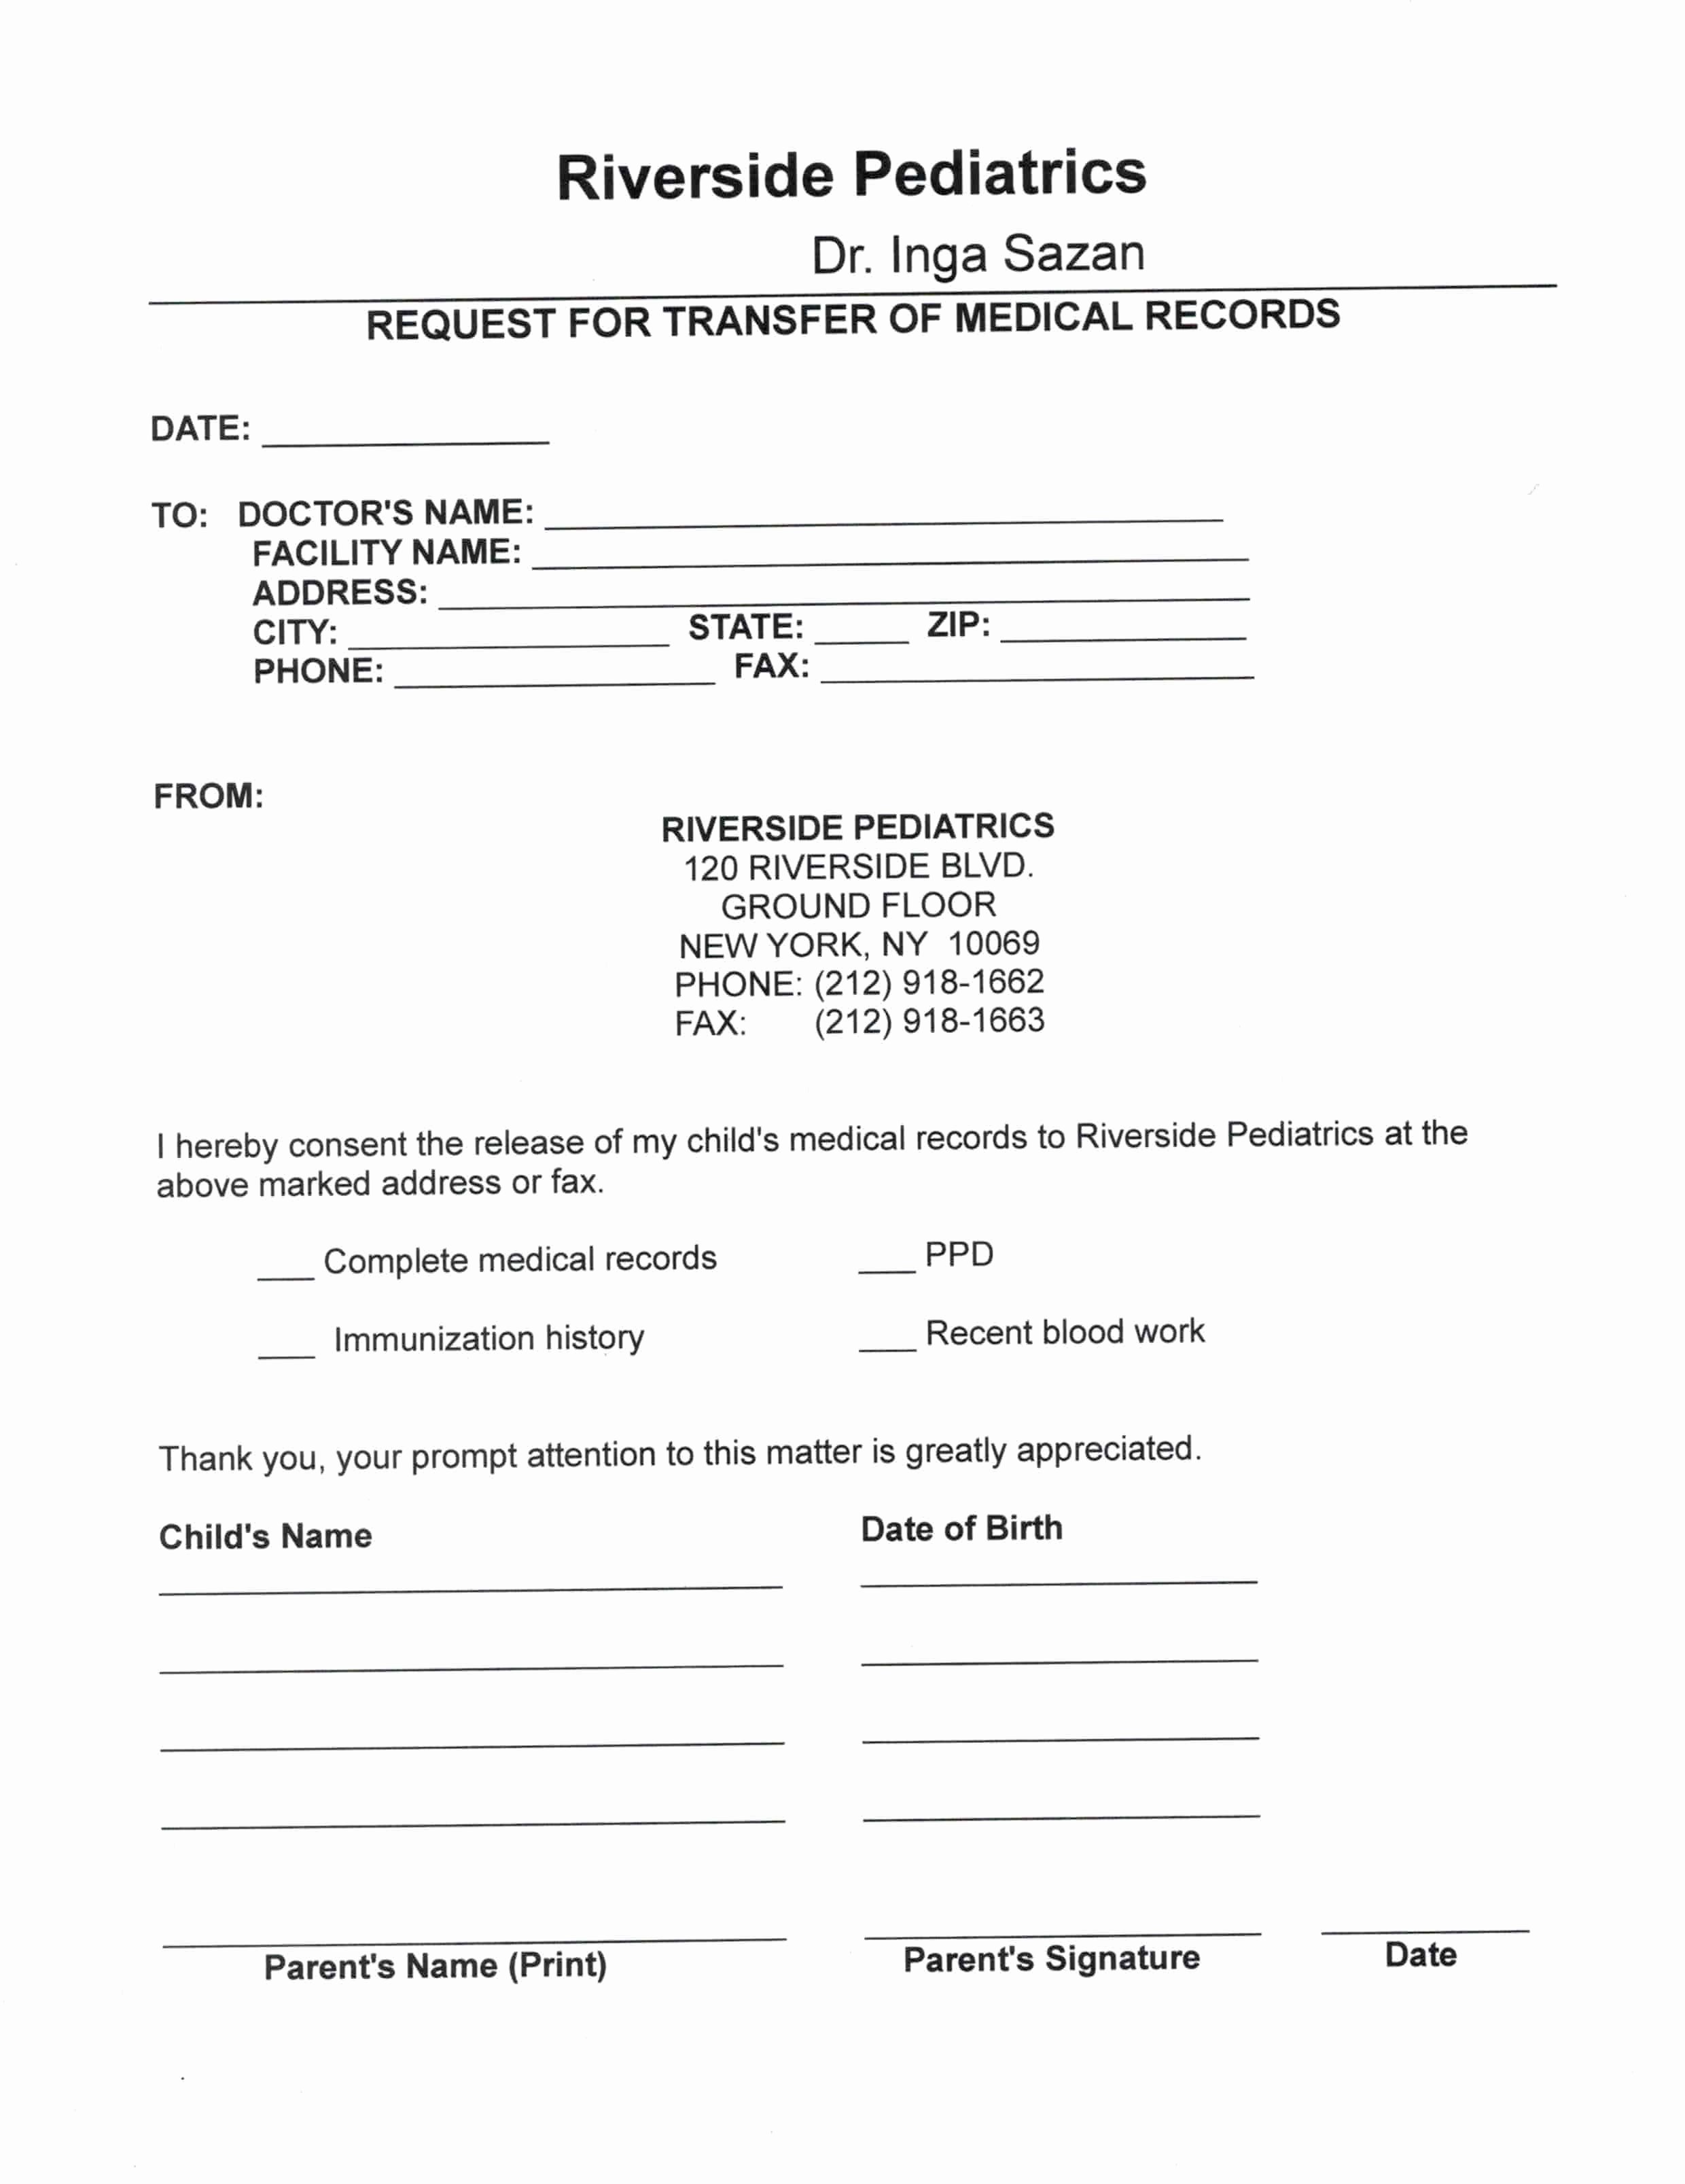 Medical Records form Template Inspirational form Medical Records Request form